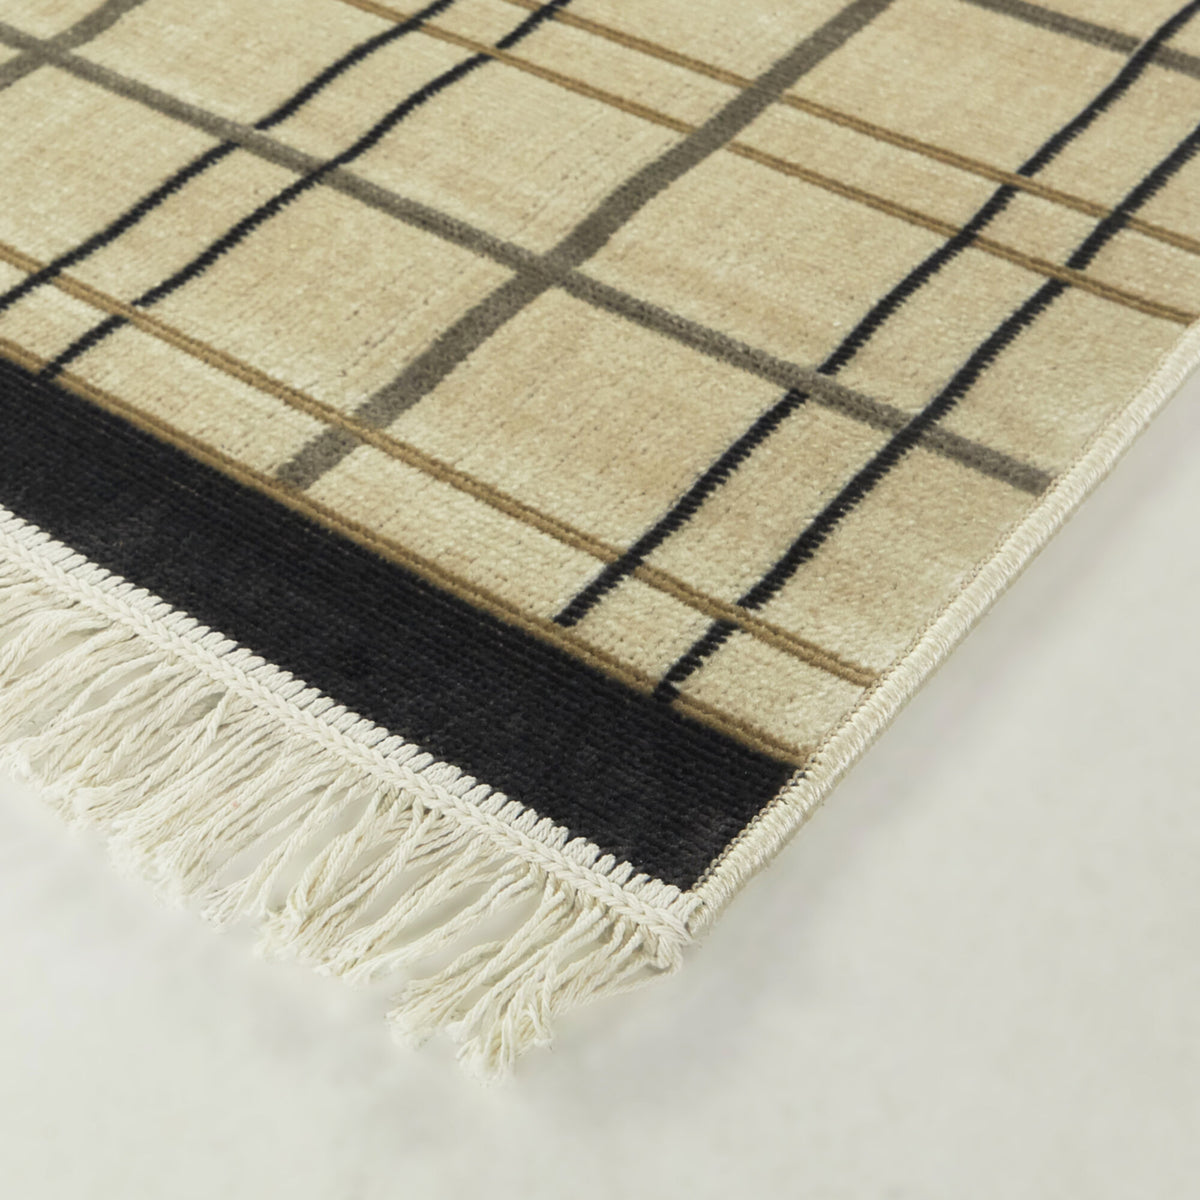 Raleigh Recycled Plaid Area Rug